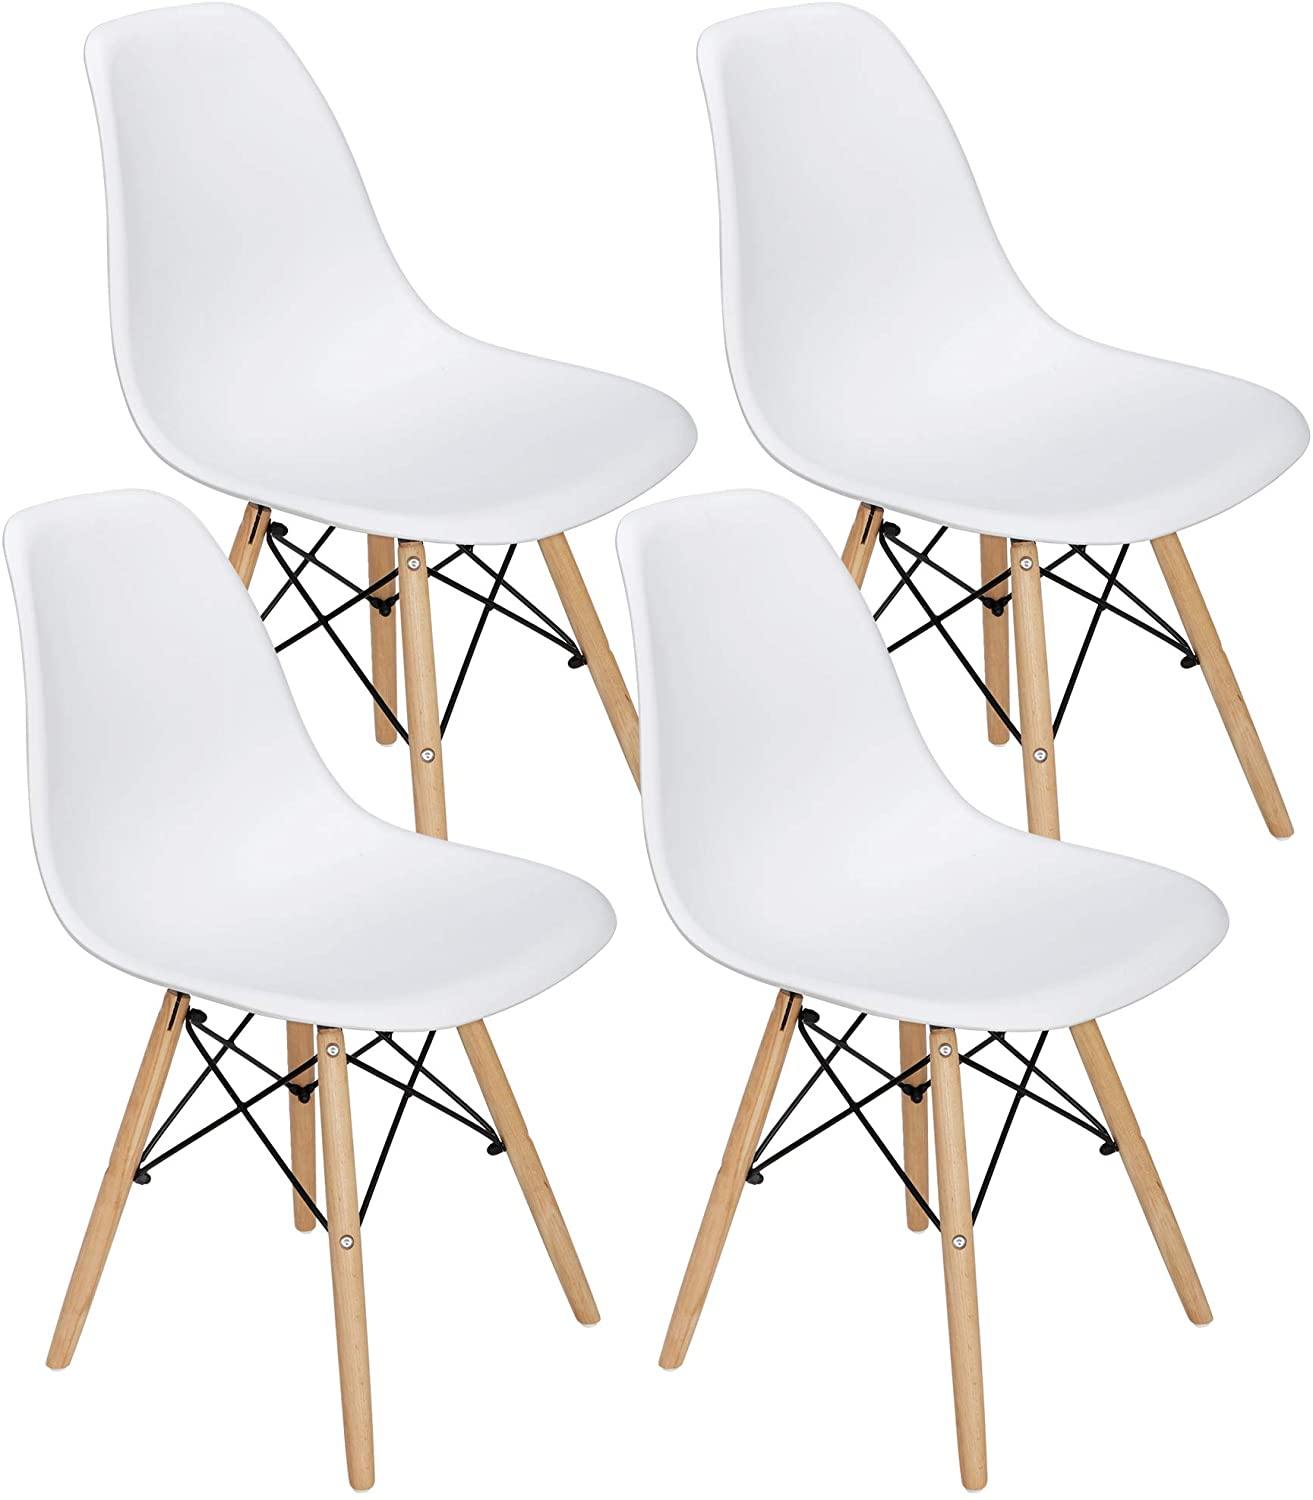 Shell Lounge Plastic Chair for Kitchen Bedroom ZENY Set of 4 Modern Style Dining Chair Dining Living Room Mid-Century Modern Side Chairs with Wooden Walnut Legs